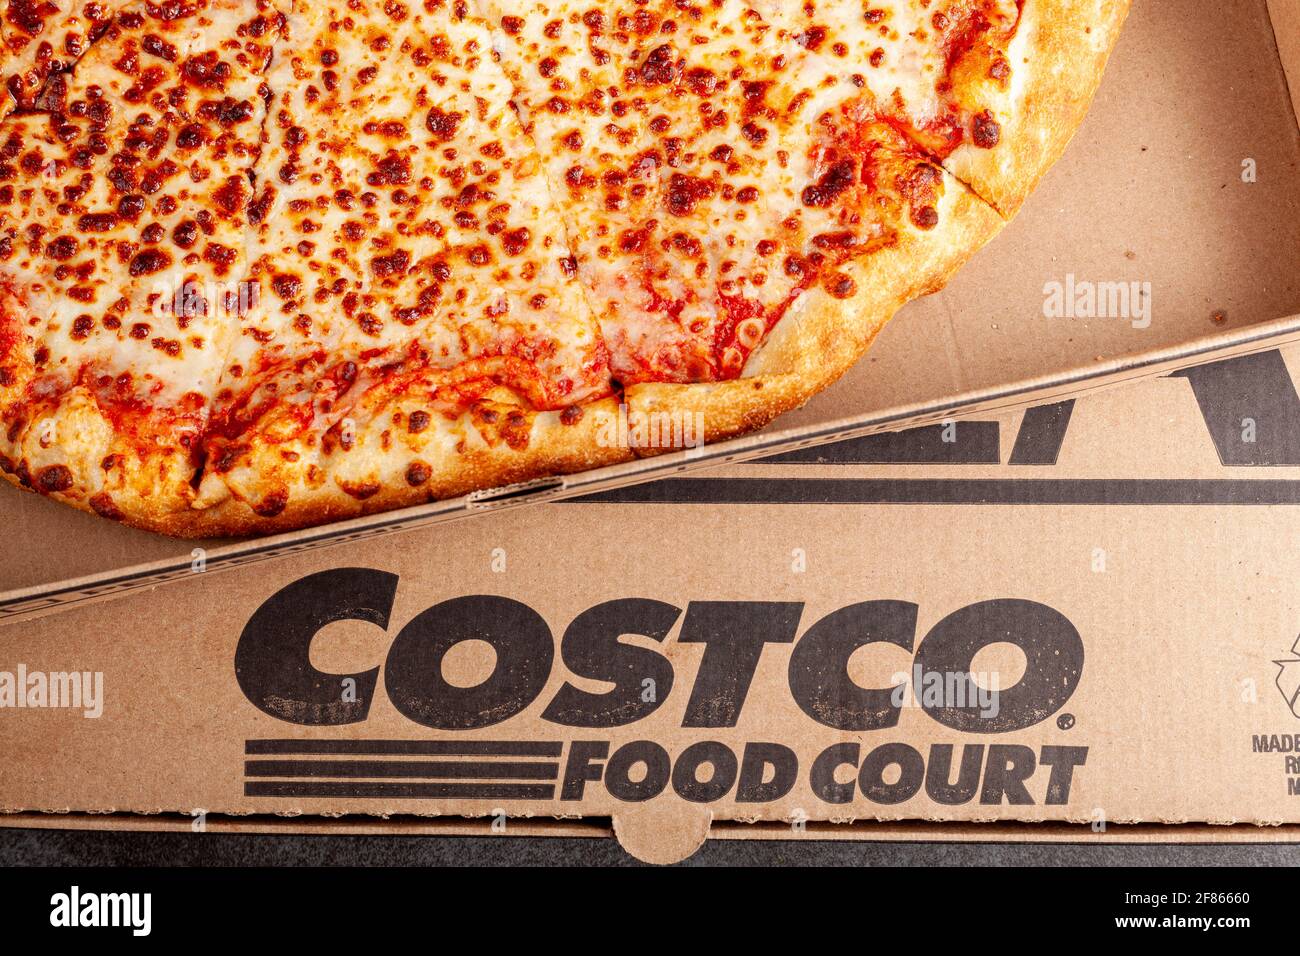 Clarksburg, MD, USA 04-7-2021: Closeup flat lay top view image of a carton box of delicious made to order COSTCO cheese pizza. Very popular bargain pr Stock Photo